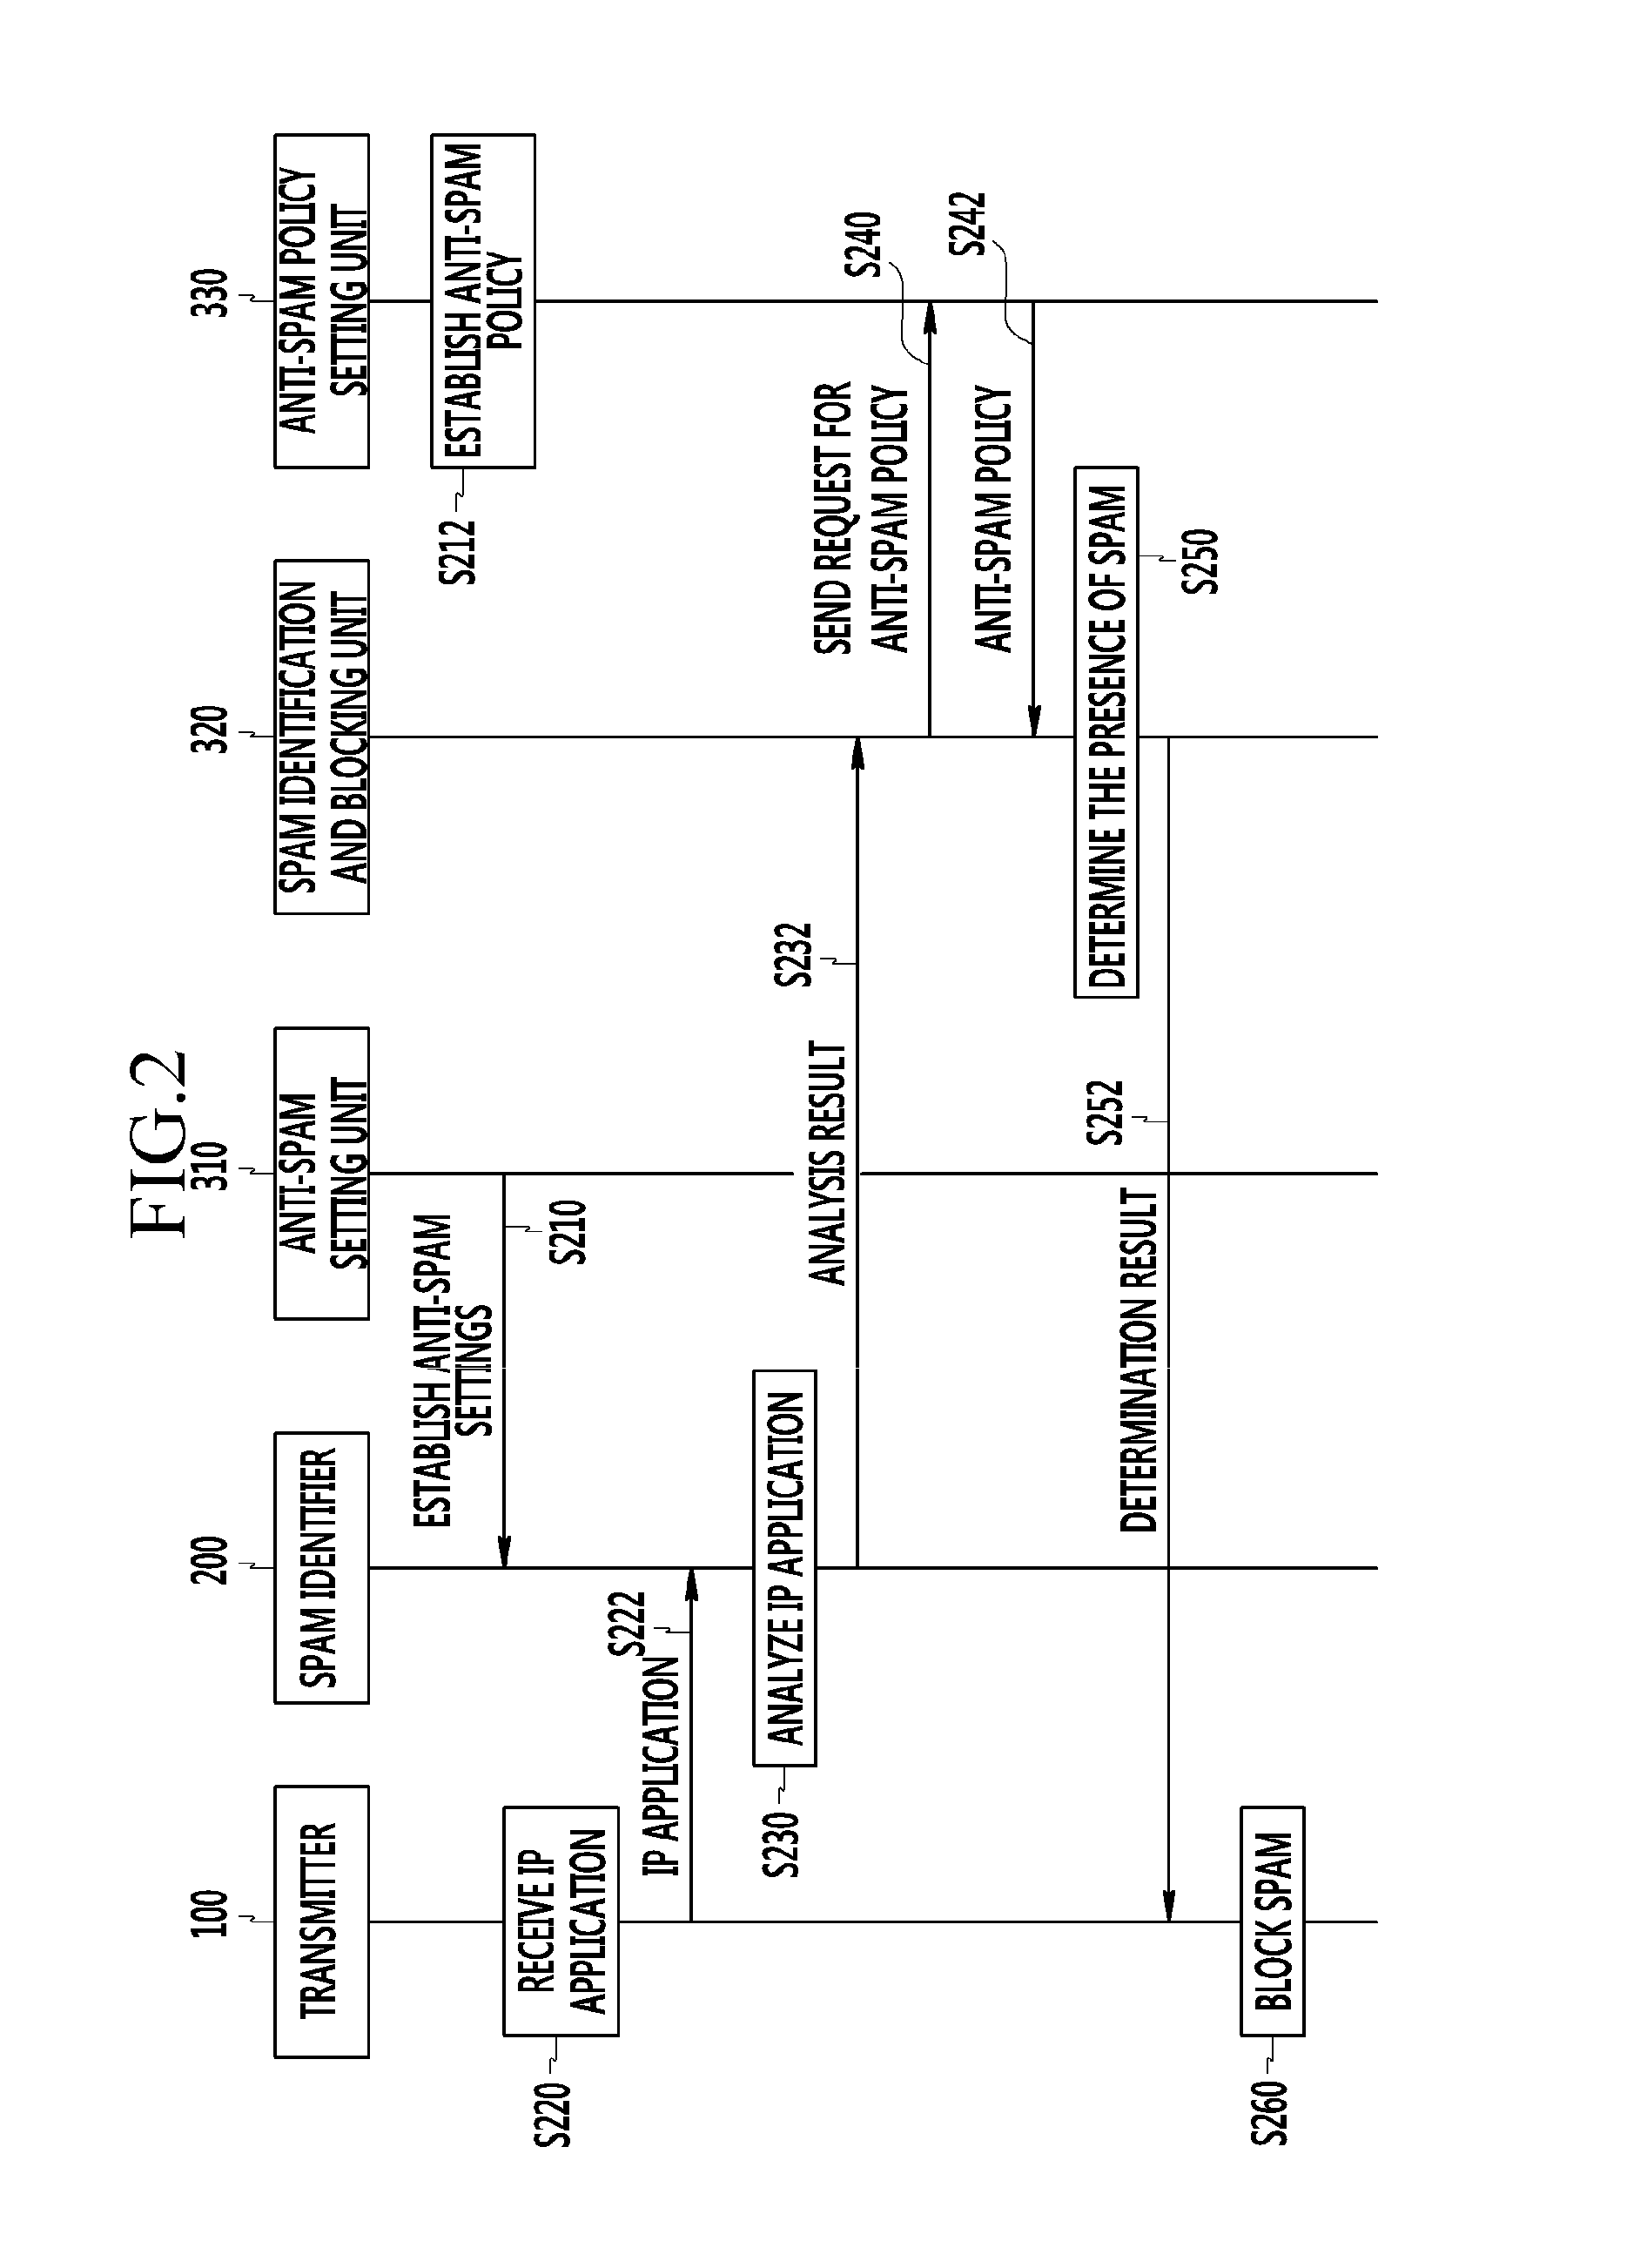 Spam countering method and apparatus